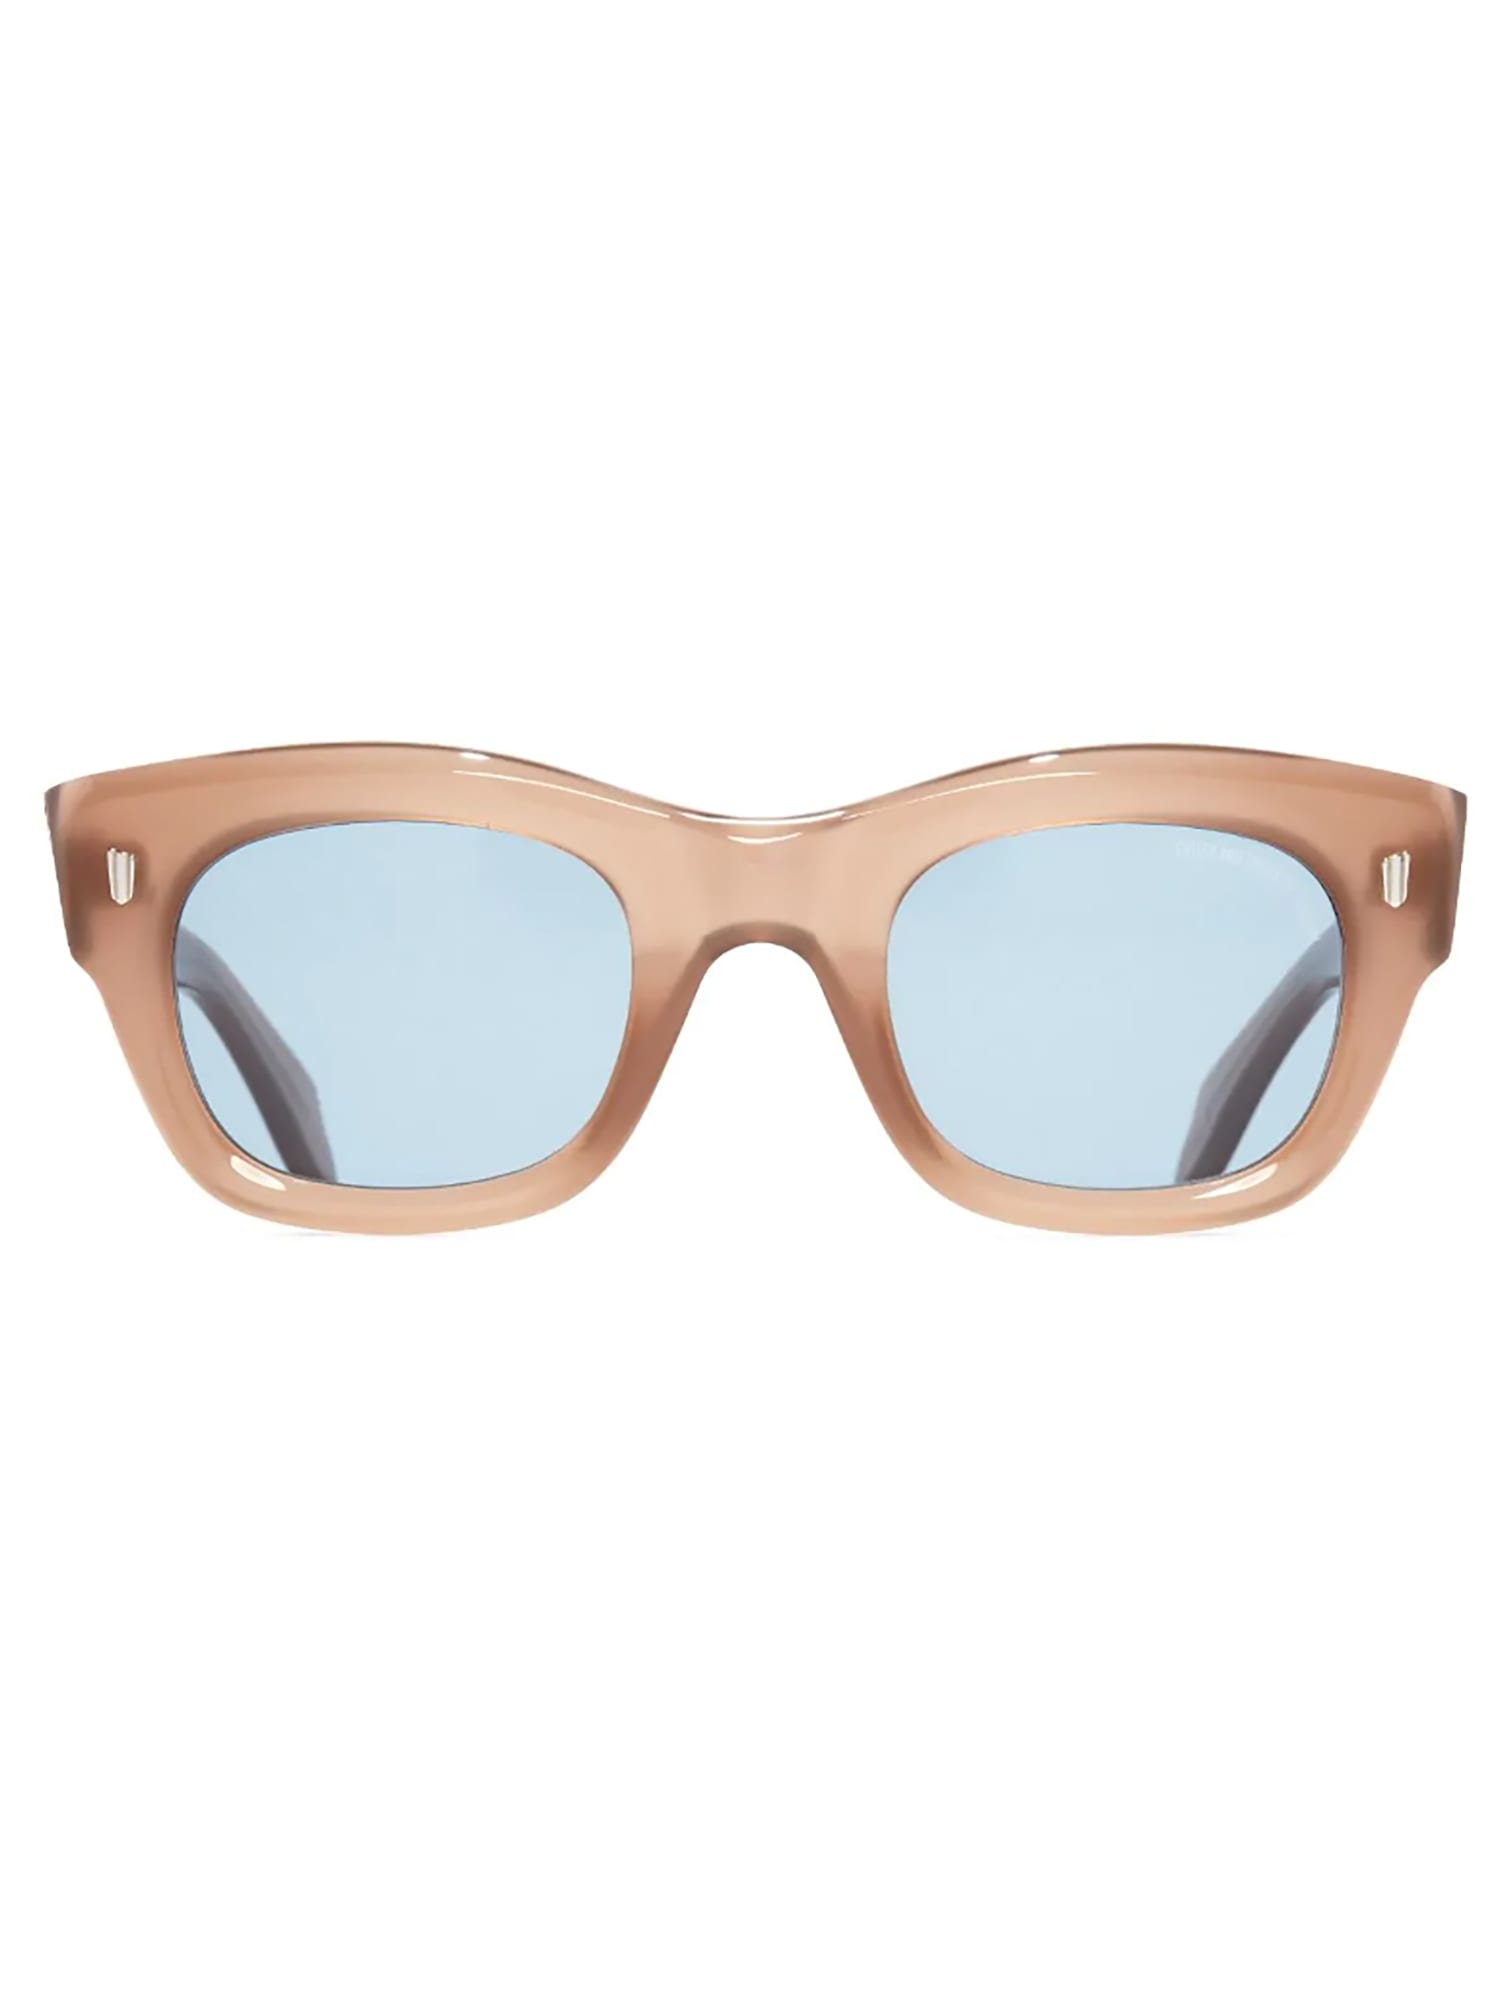 Shop Cutler And Gross 9261 Sunglasses In Humble Potato